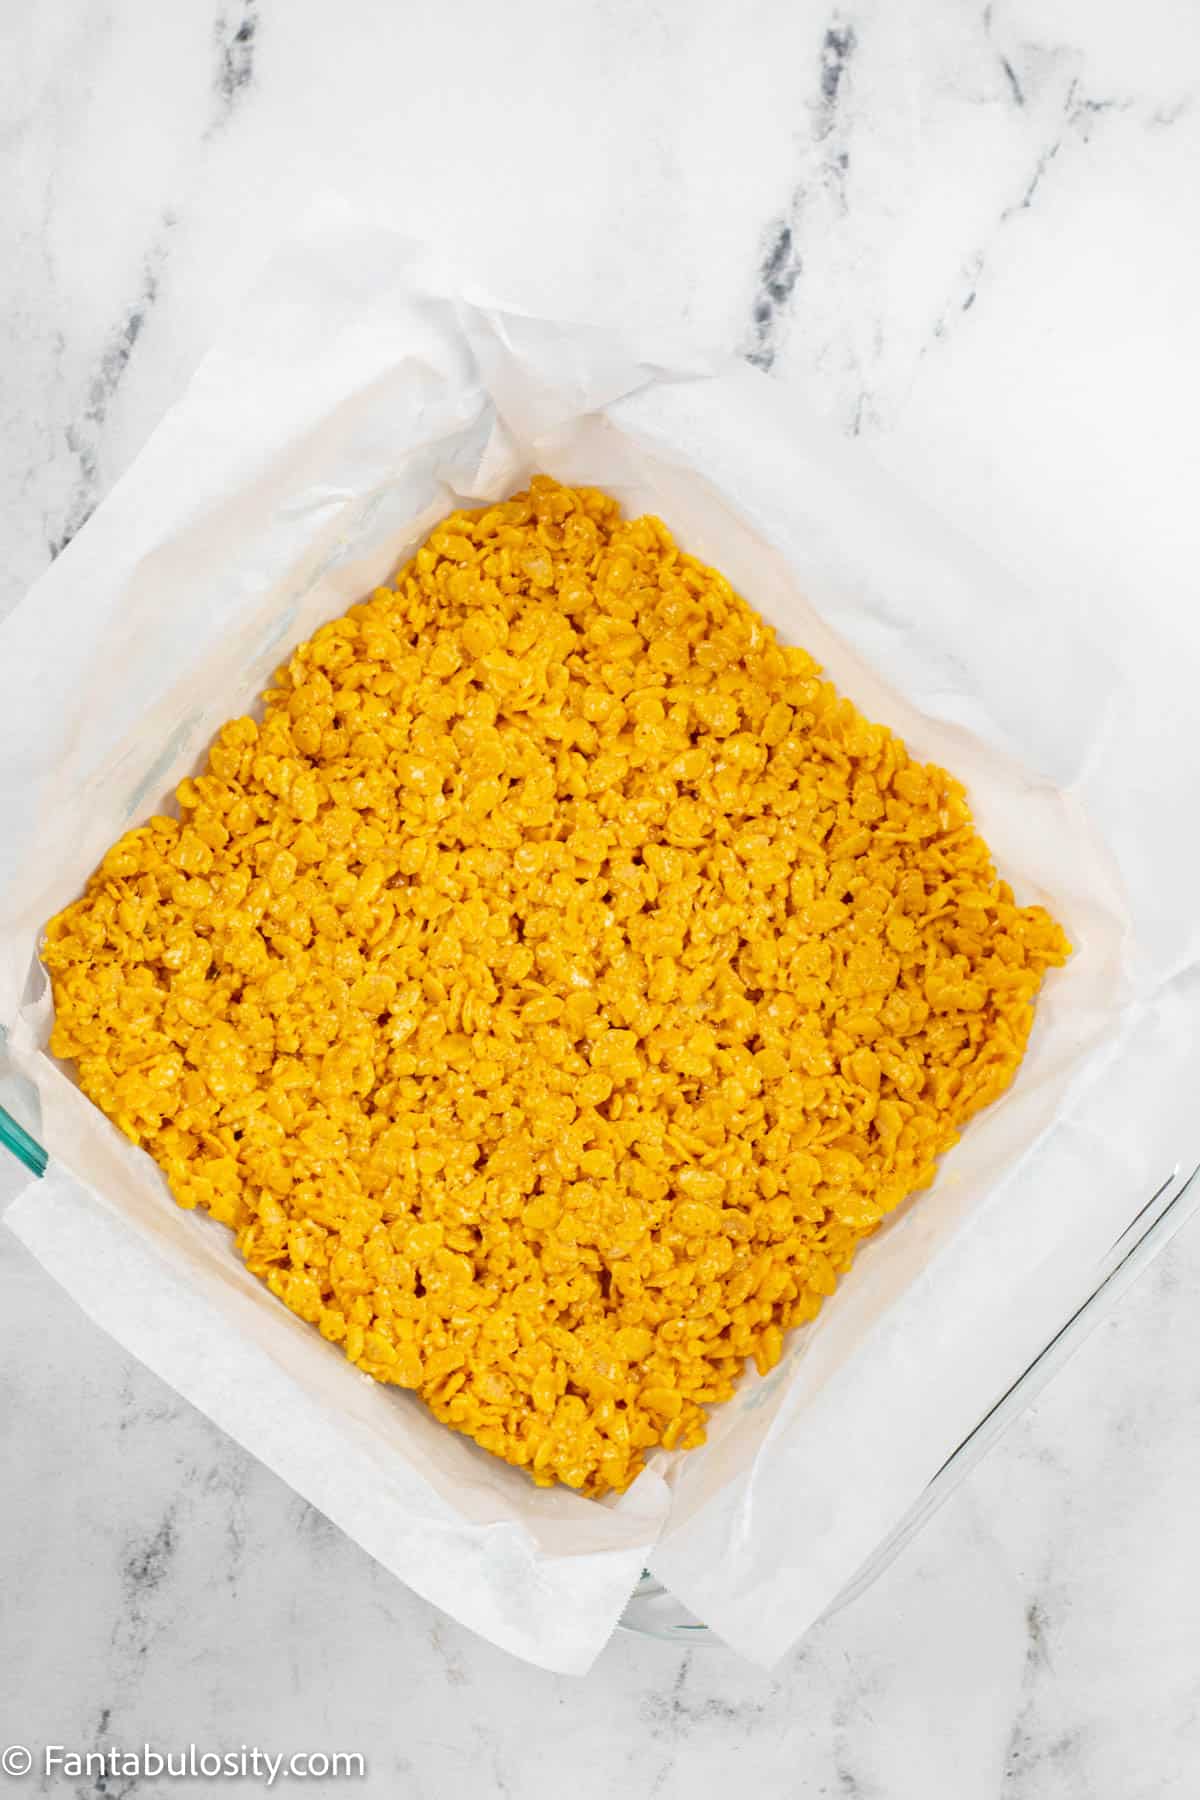 An 8x8 cake pan is filled with a layer of yellow rice kripie treats for candy corn rice krispie treats